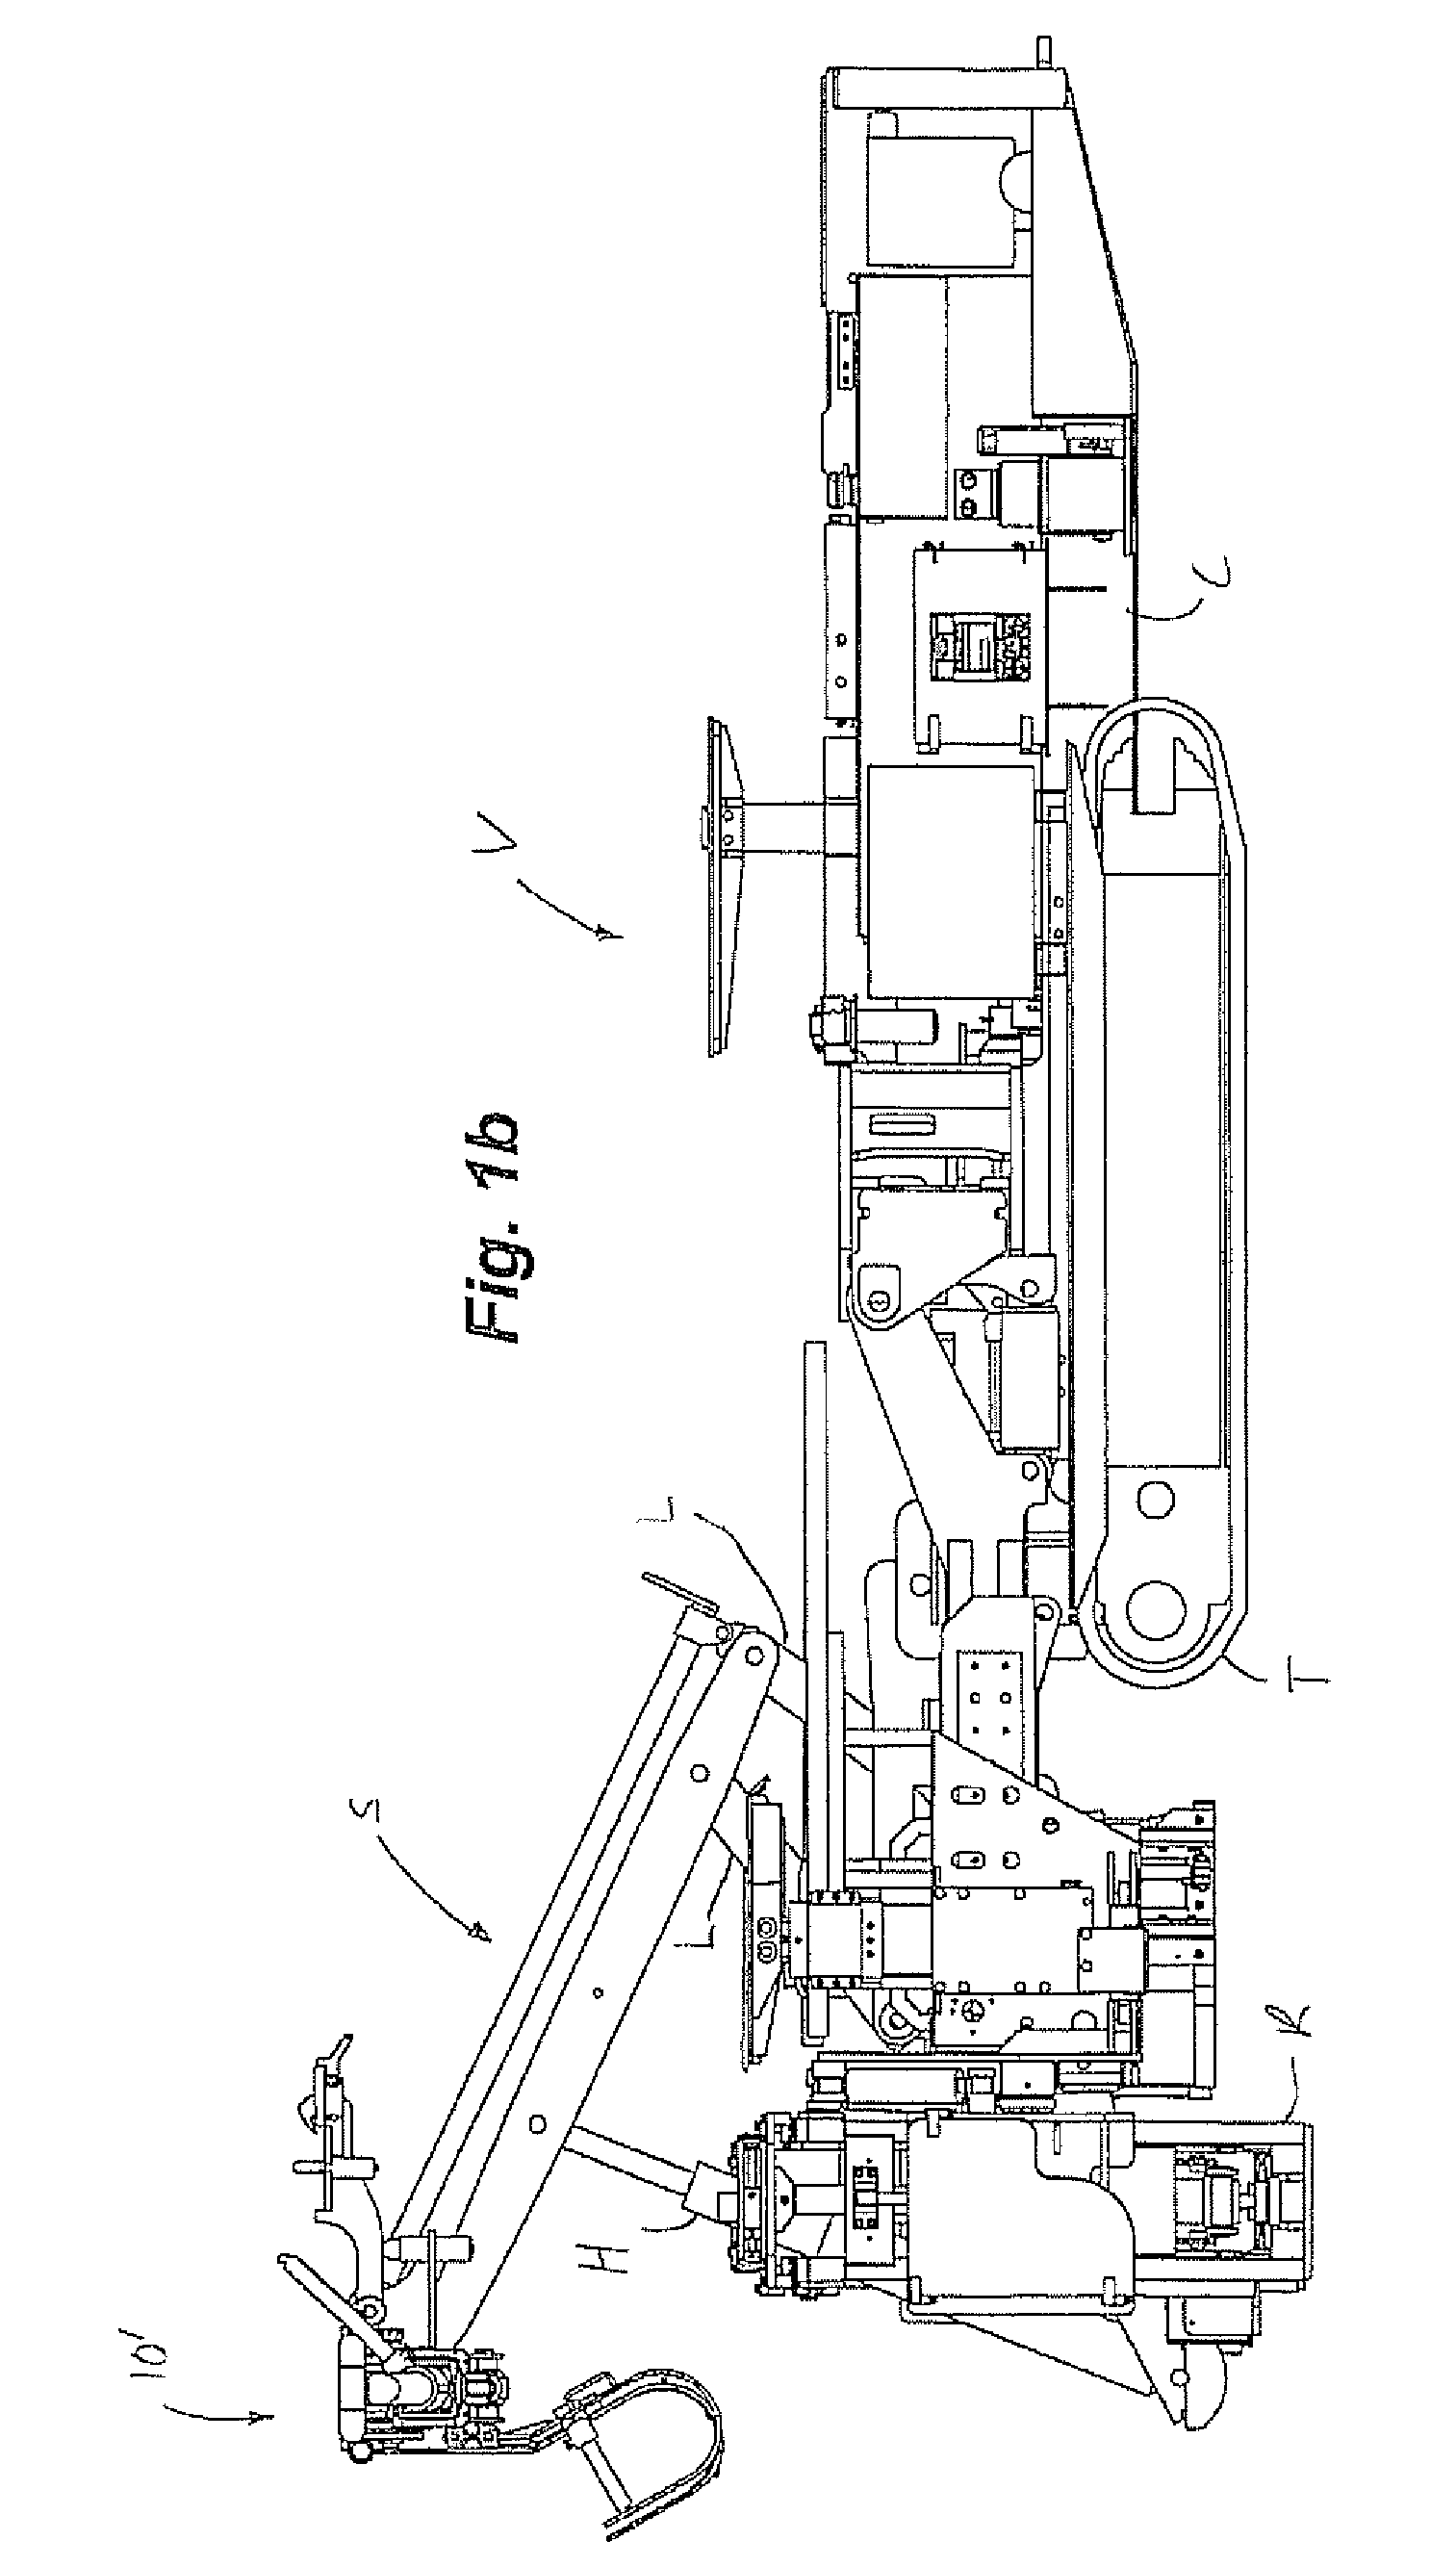 Mesh handling system for an underground mining machine and related methods